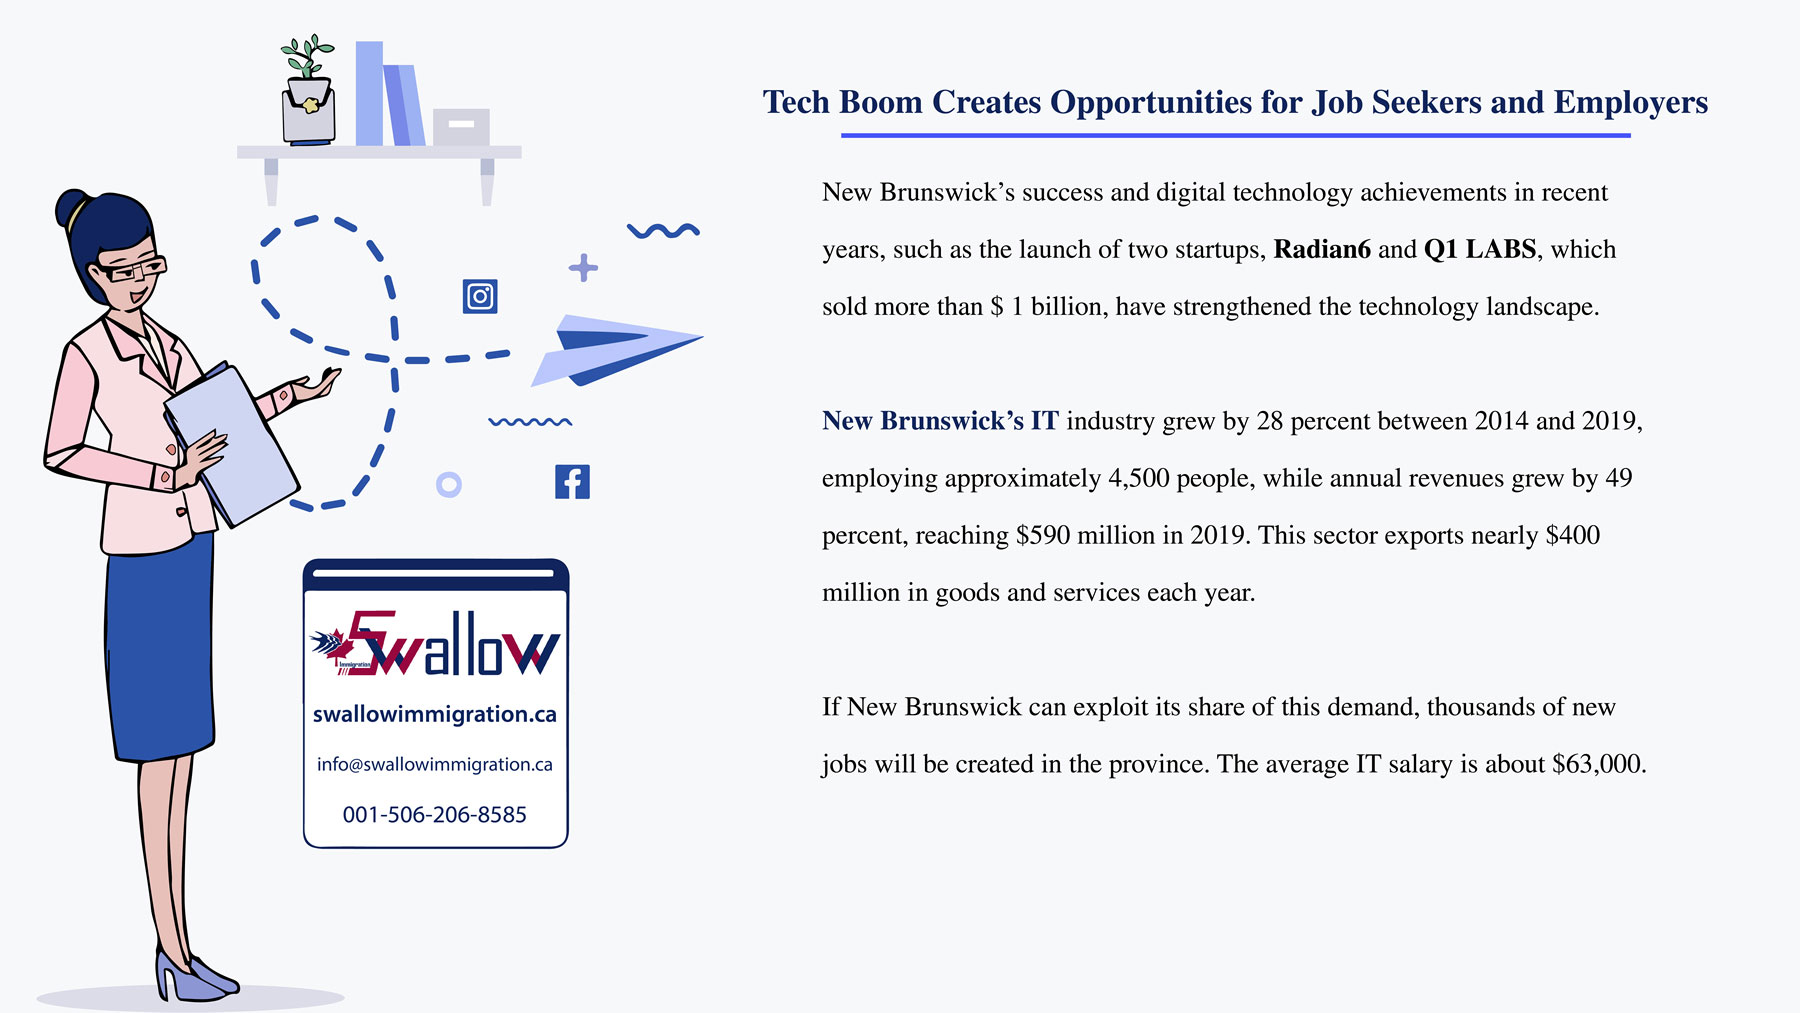 Tech Boom Creates Opportunities for Job Seekers and Employers